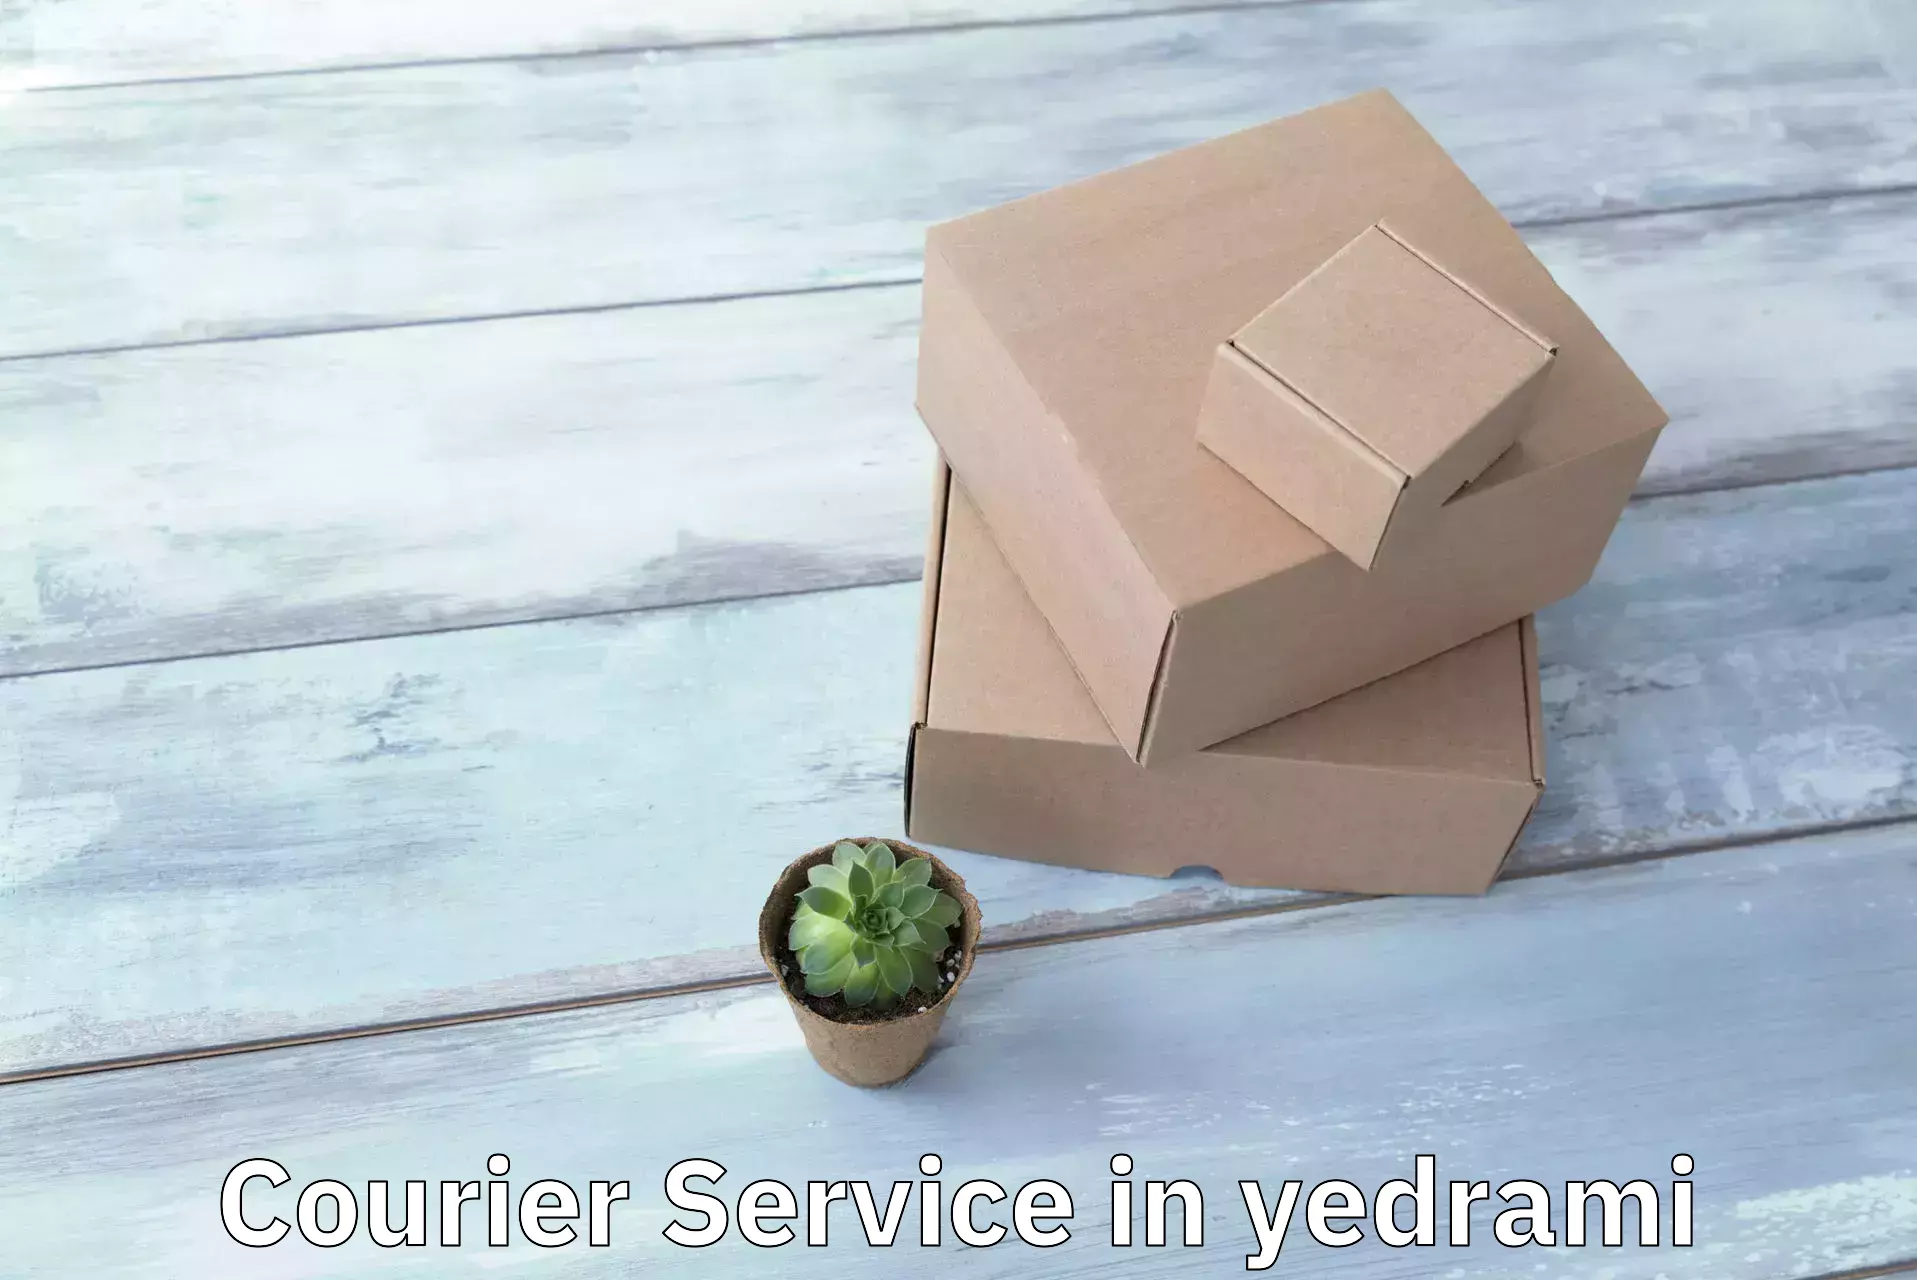 Multi-national courier services in yedrami